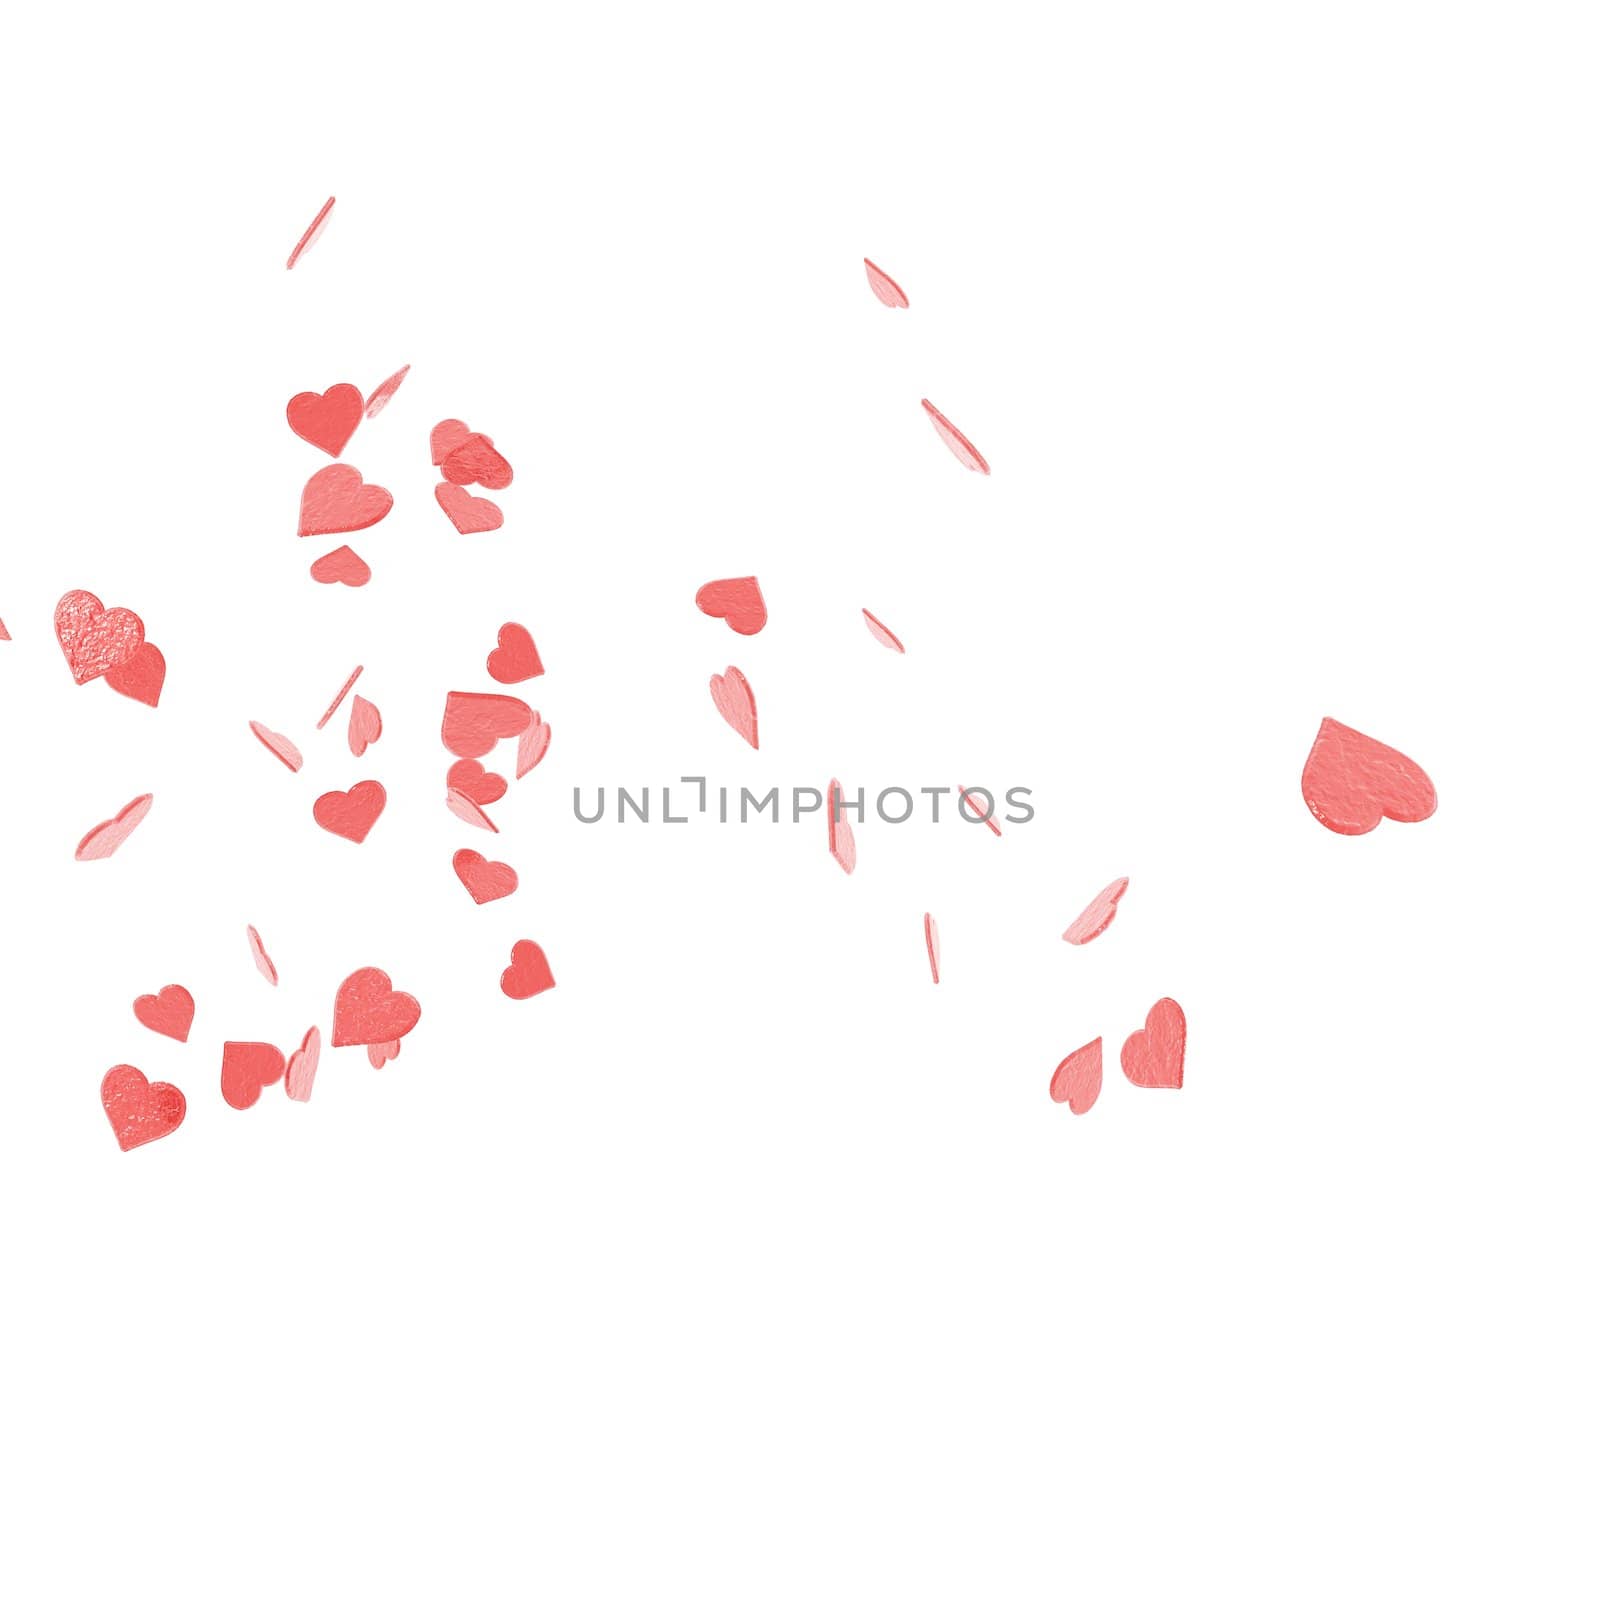 An illustration of a St. Valentines confetti failing from the sky.